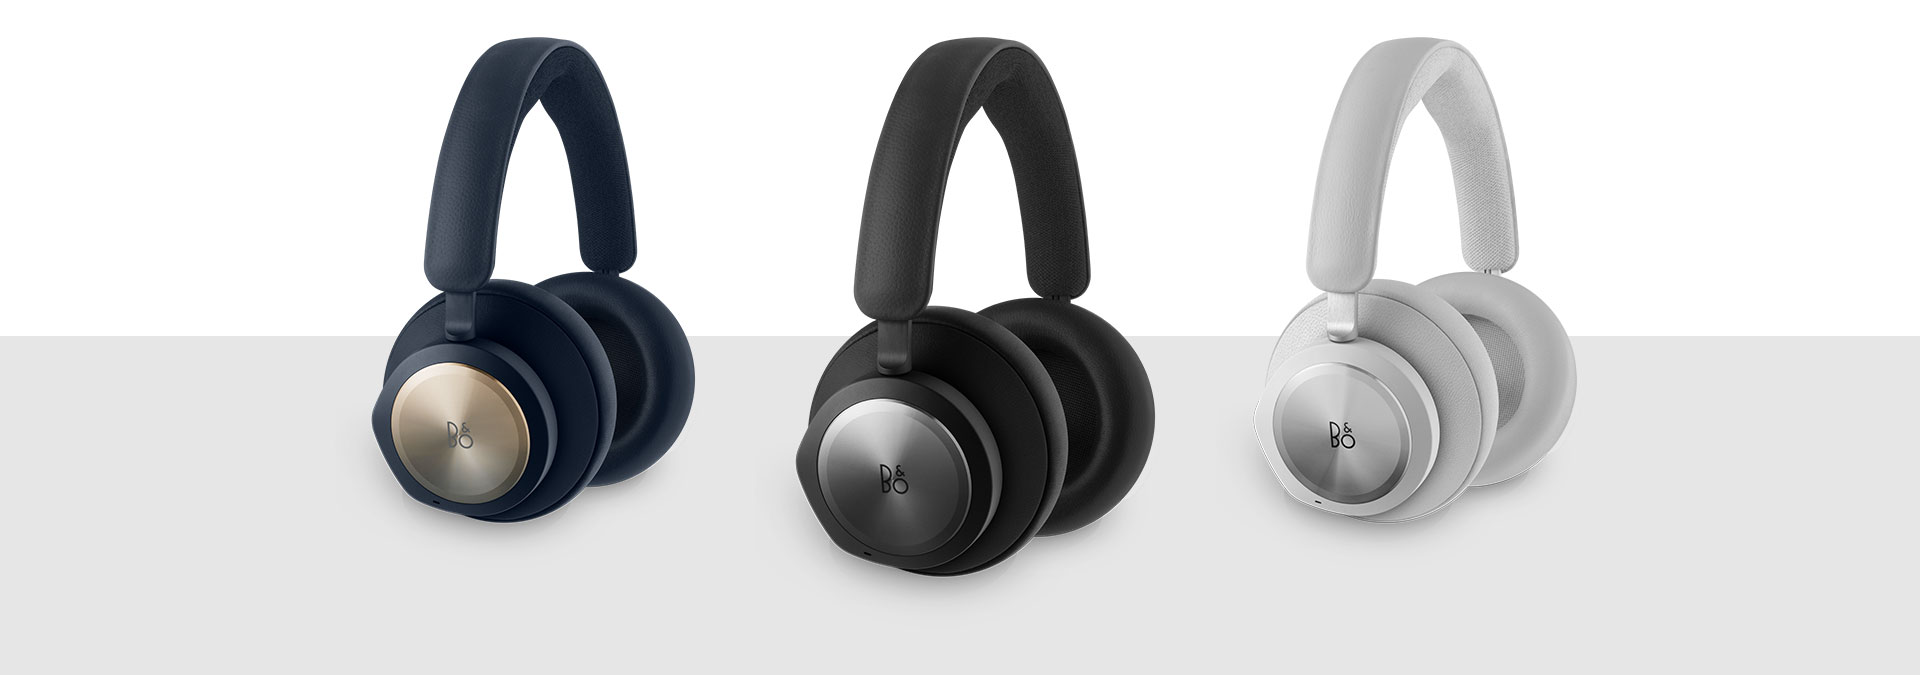 Le casque Bang & Olufsen Beoplay Portal pour Xbox disponible fin